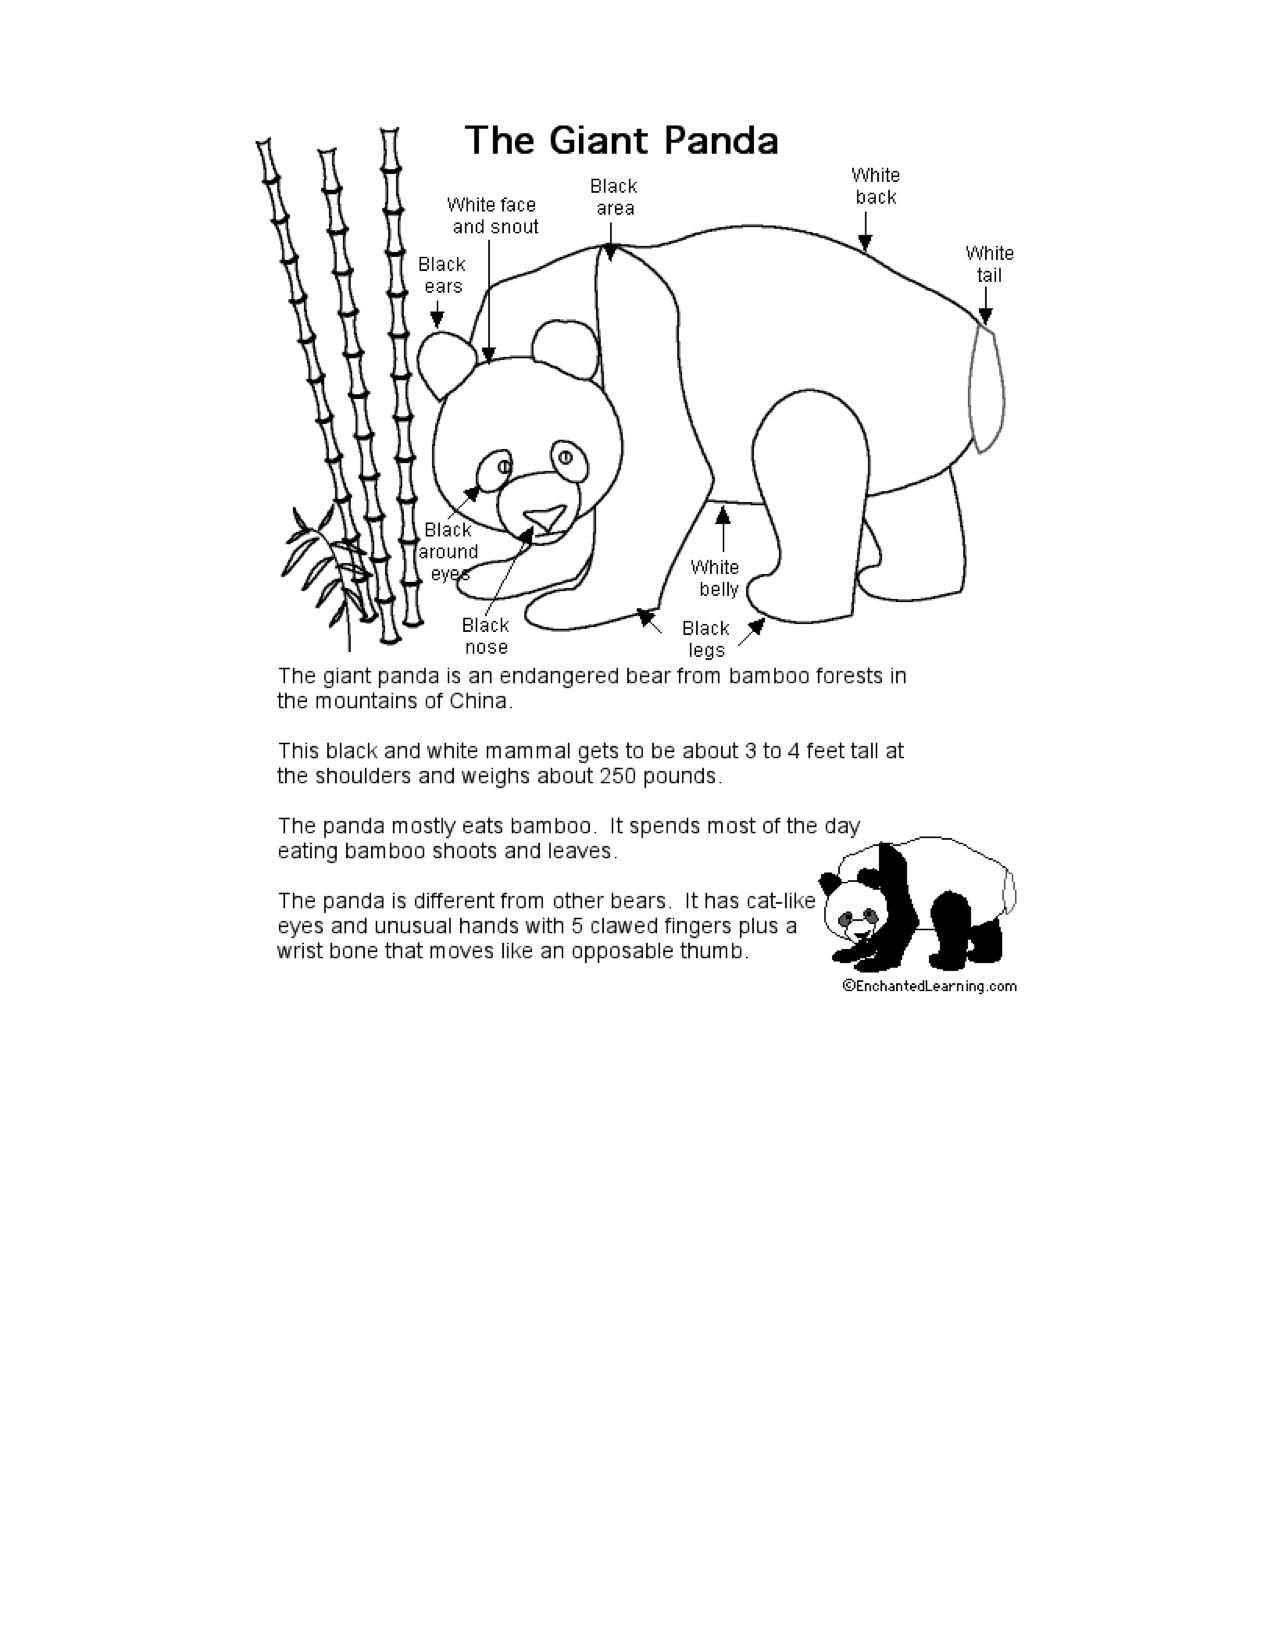 Реферат: Giant Panda Essay Research Paper What animal